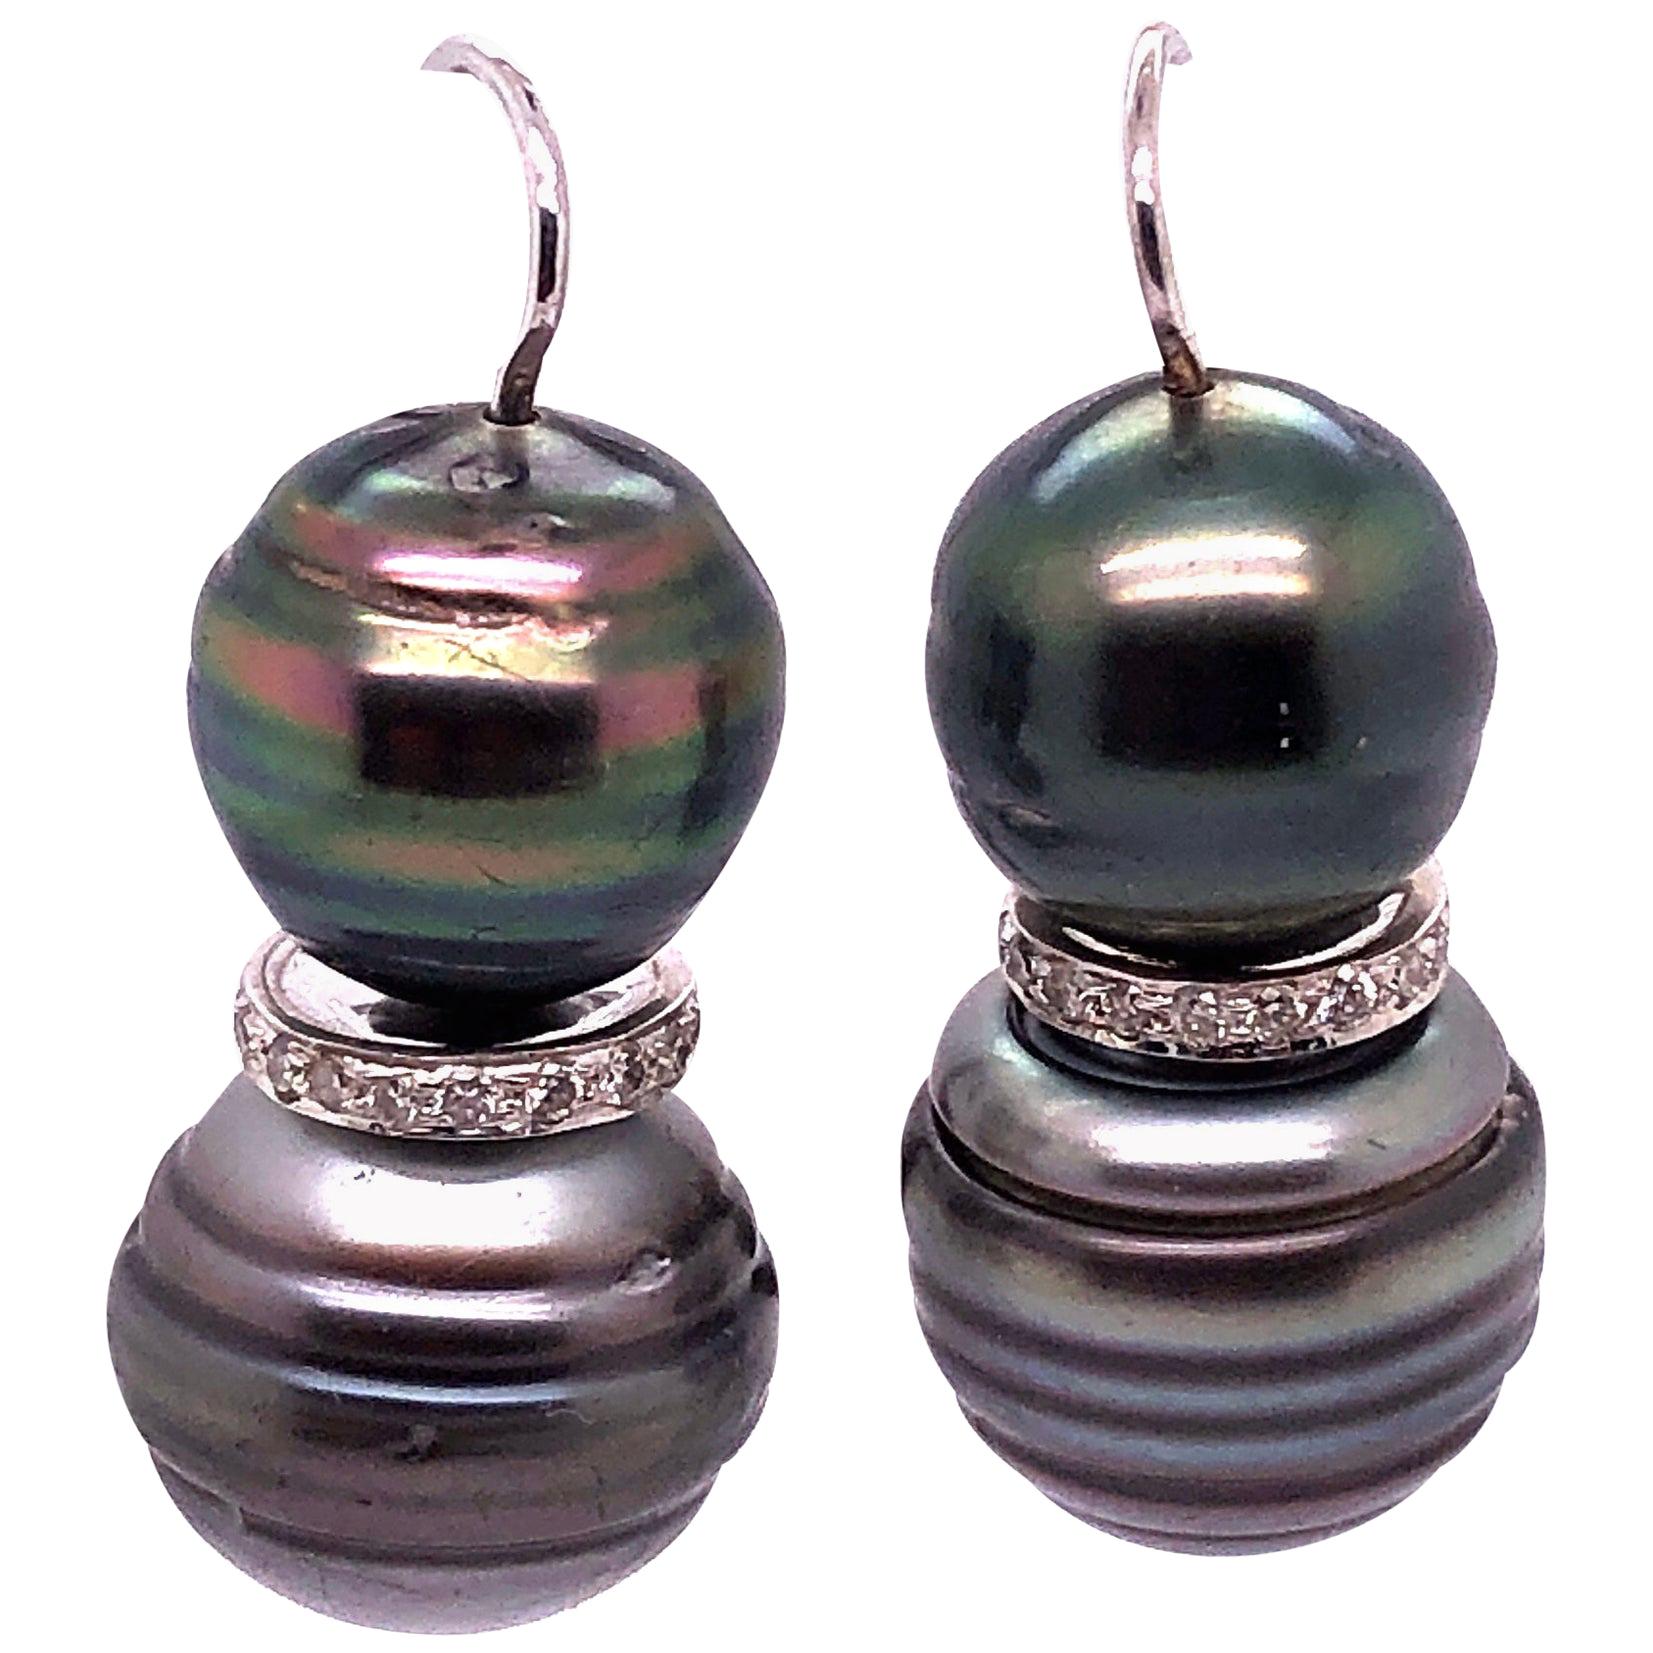 What do black pearls symbolize?